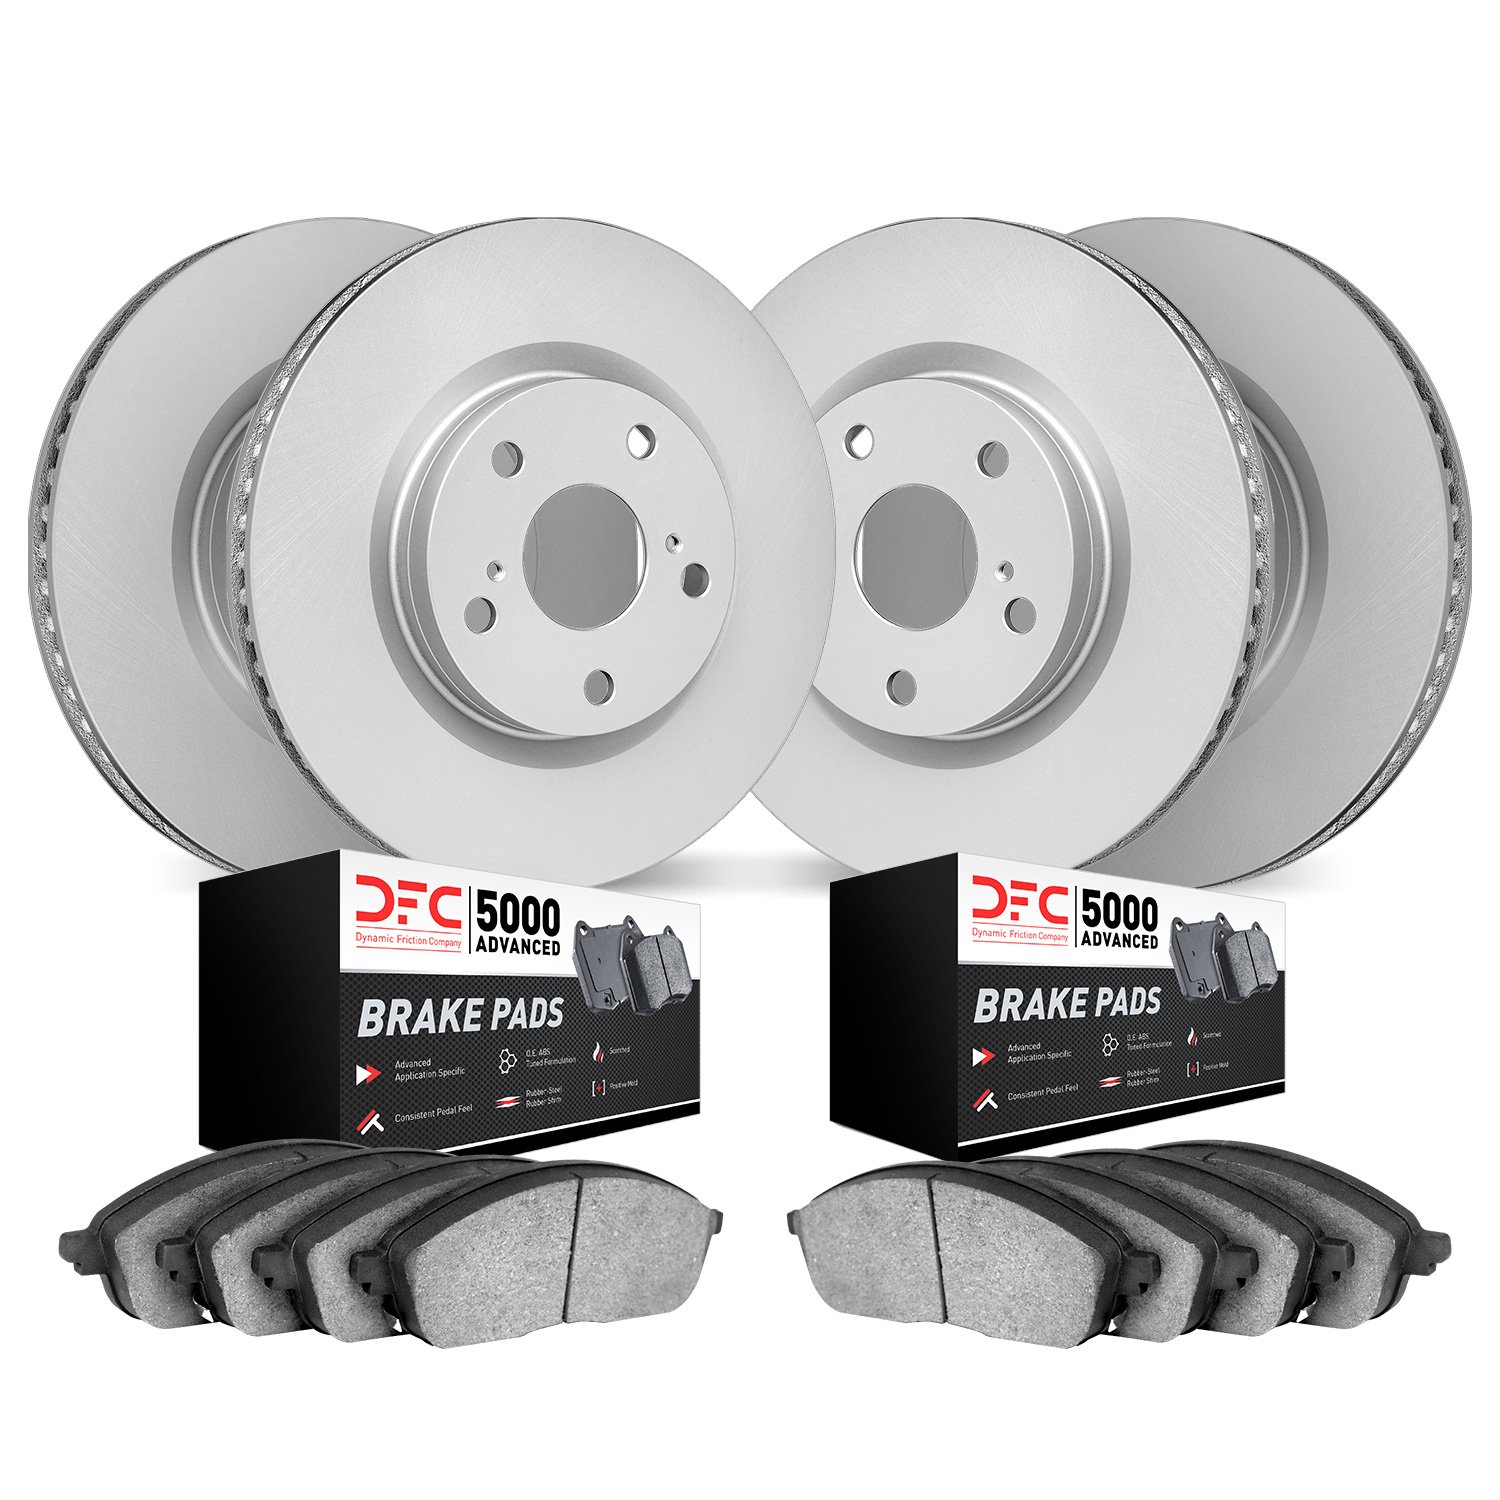 4504-63045 Geospec Brake Rotors w/5000 Advanced Brake Pads Kit, 2006-2012 Mercedes-Benz, Position: Front and Rear